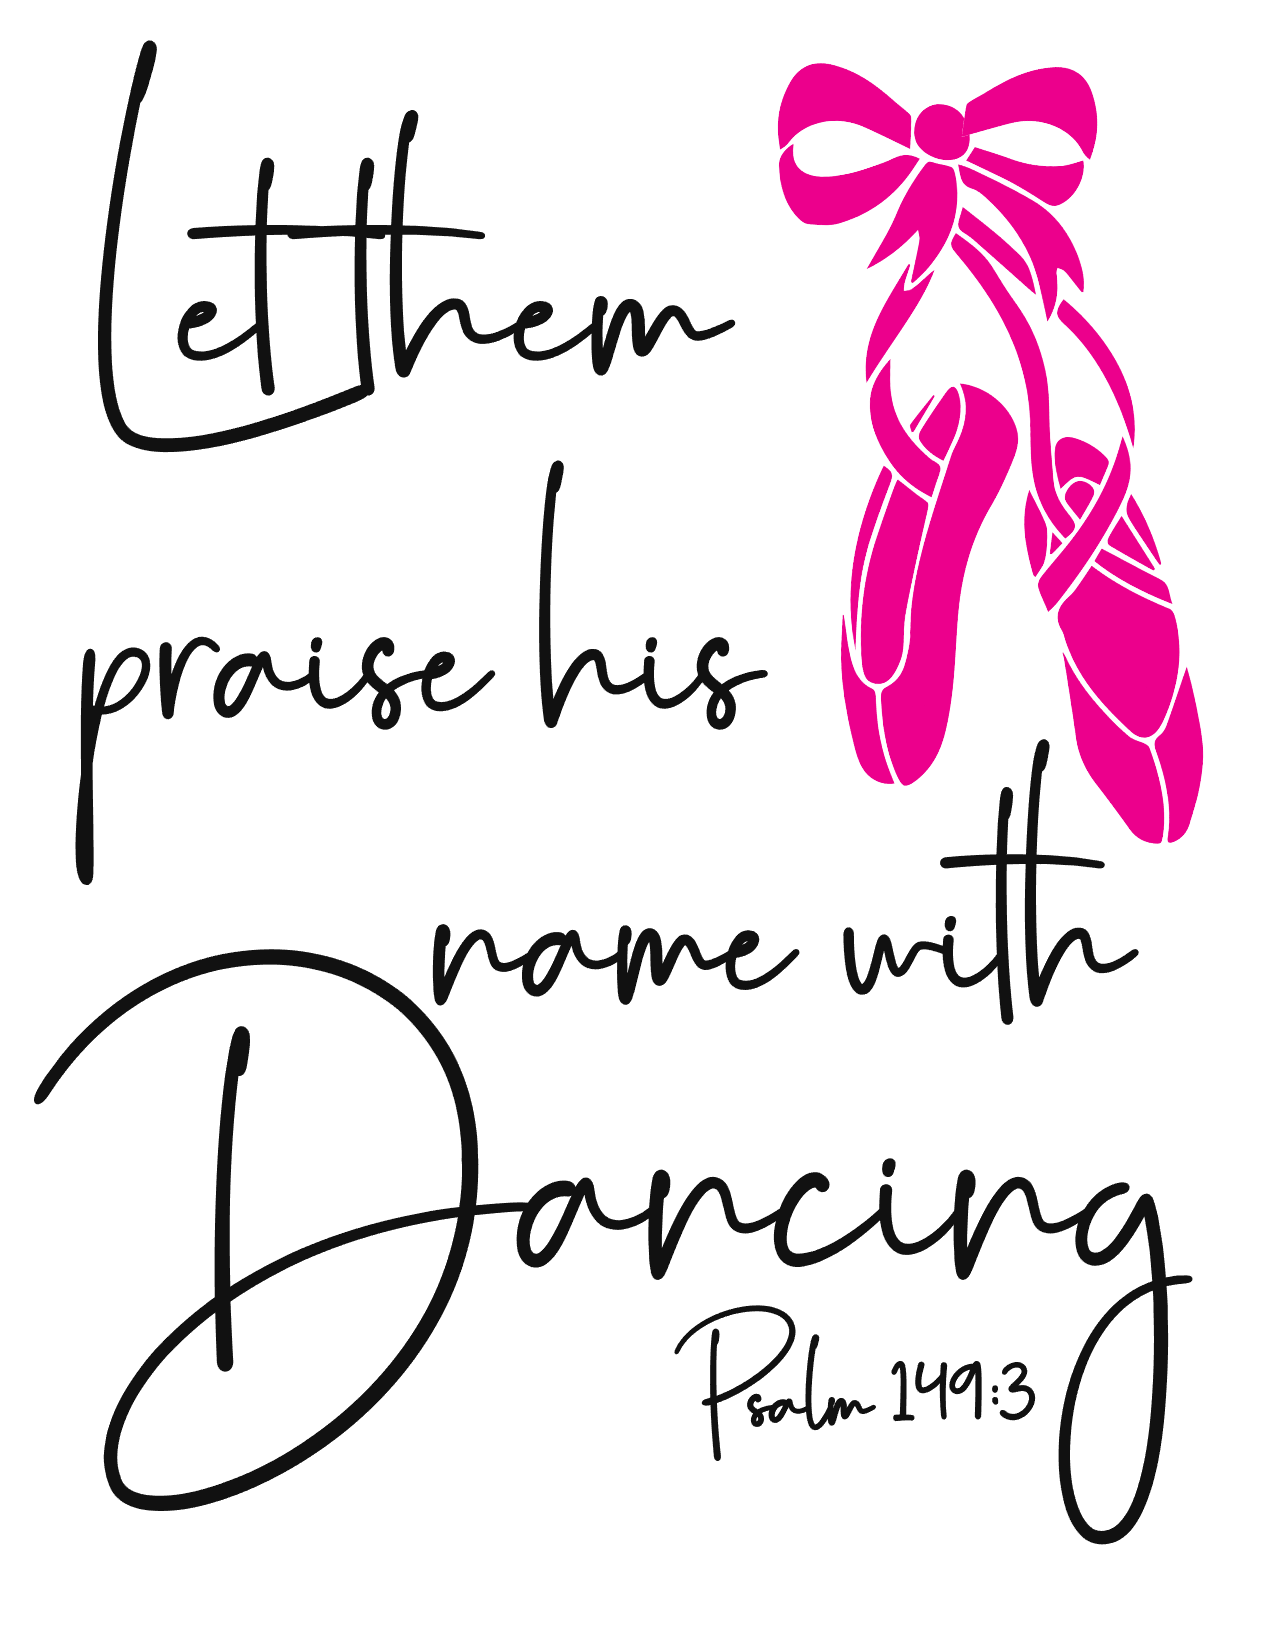 #409 Let them praise his name with Dancing Psalm 149:3